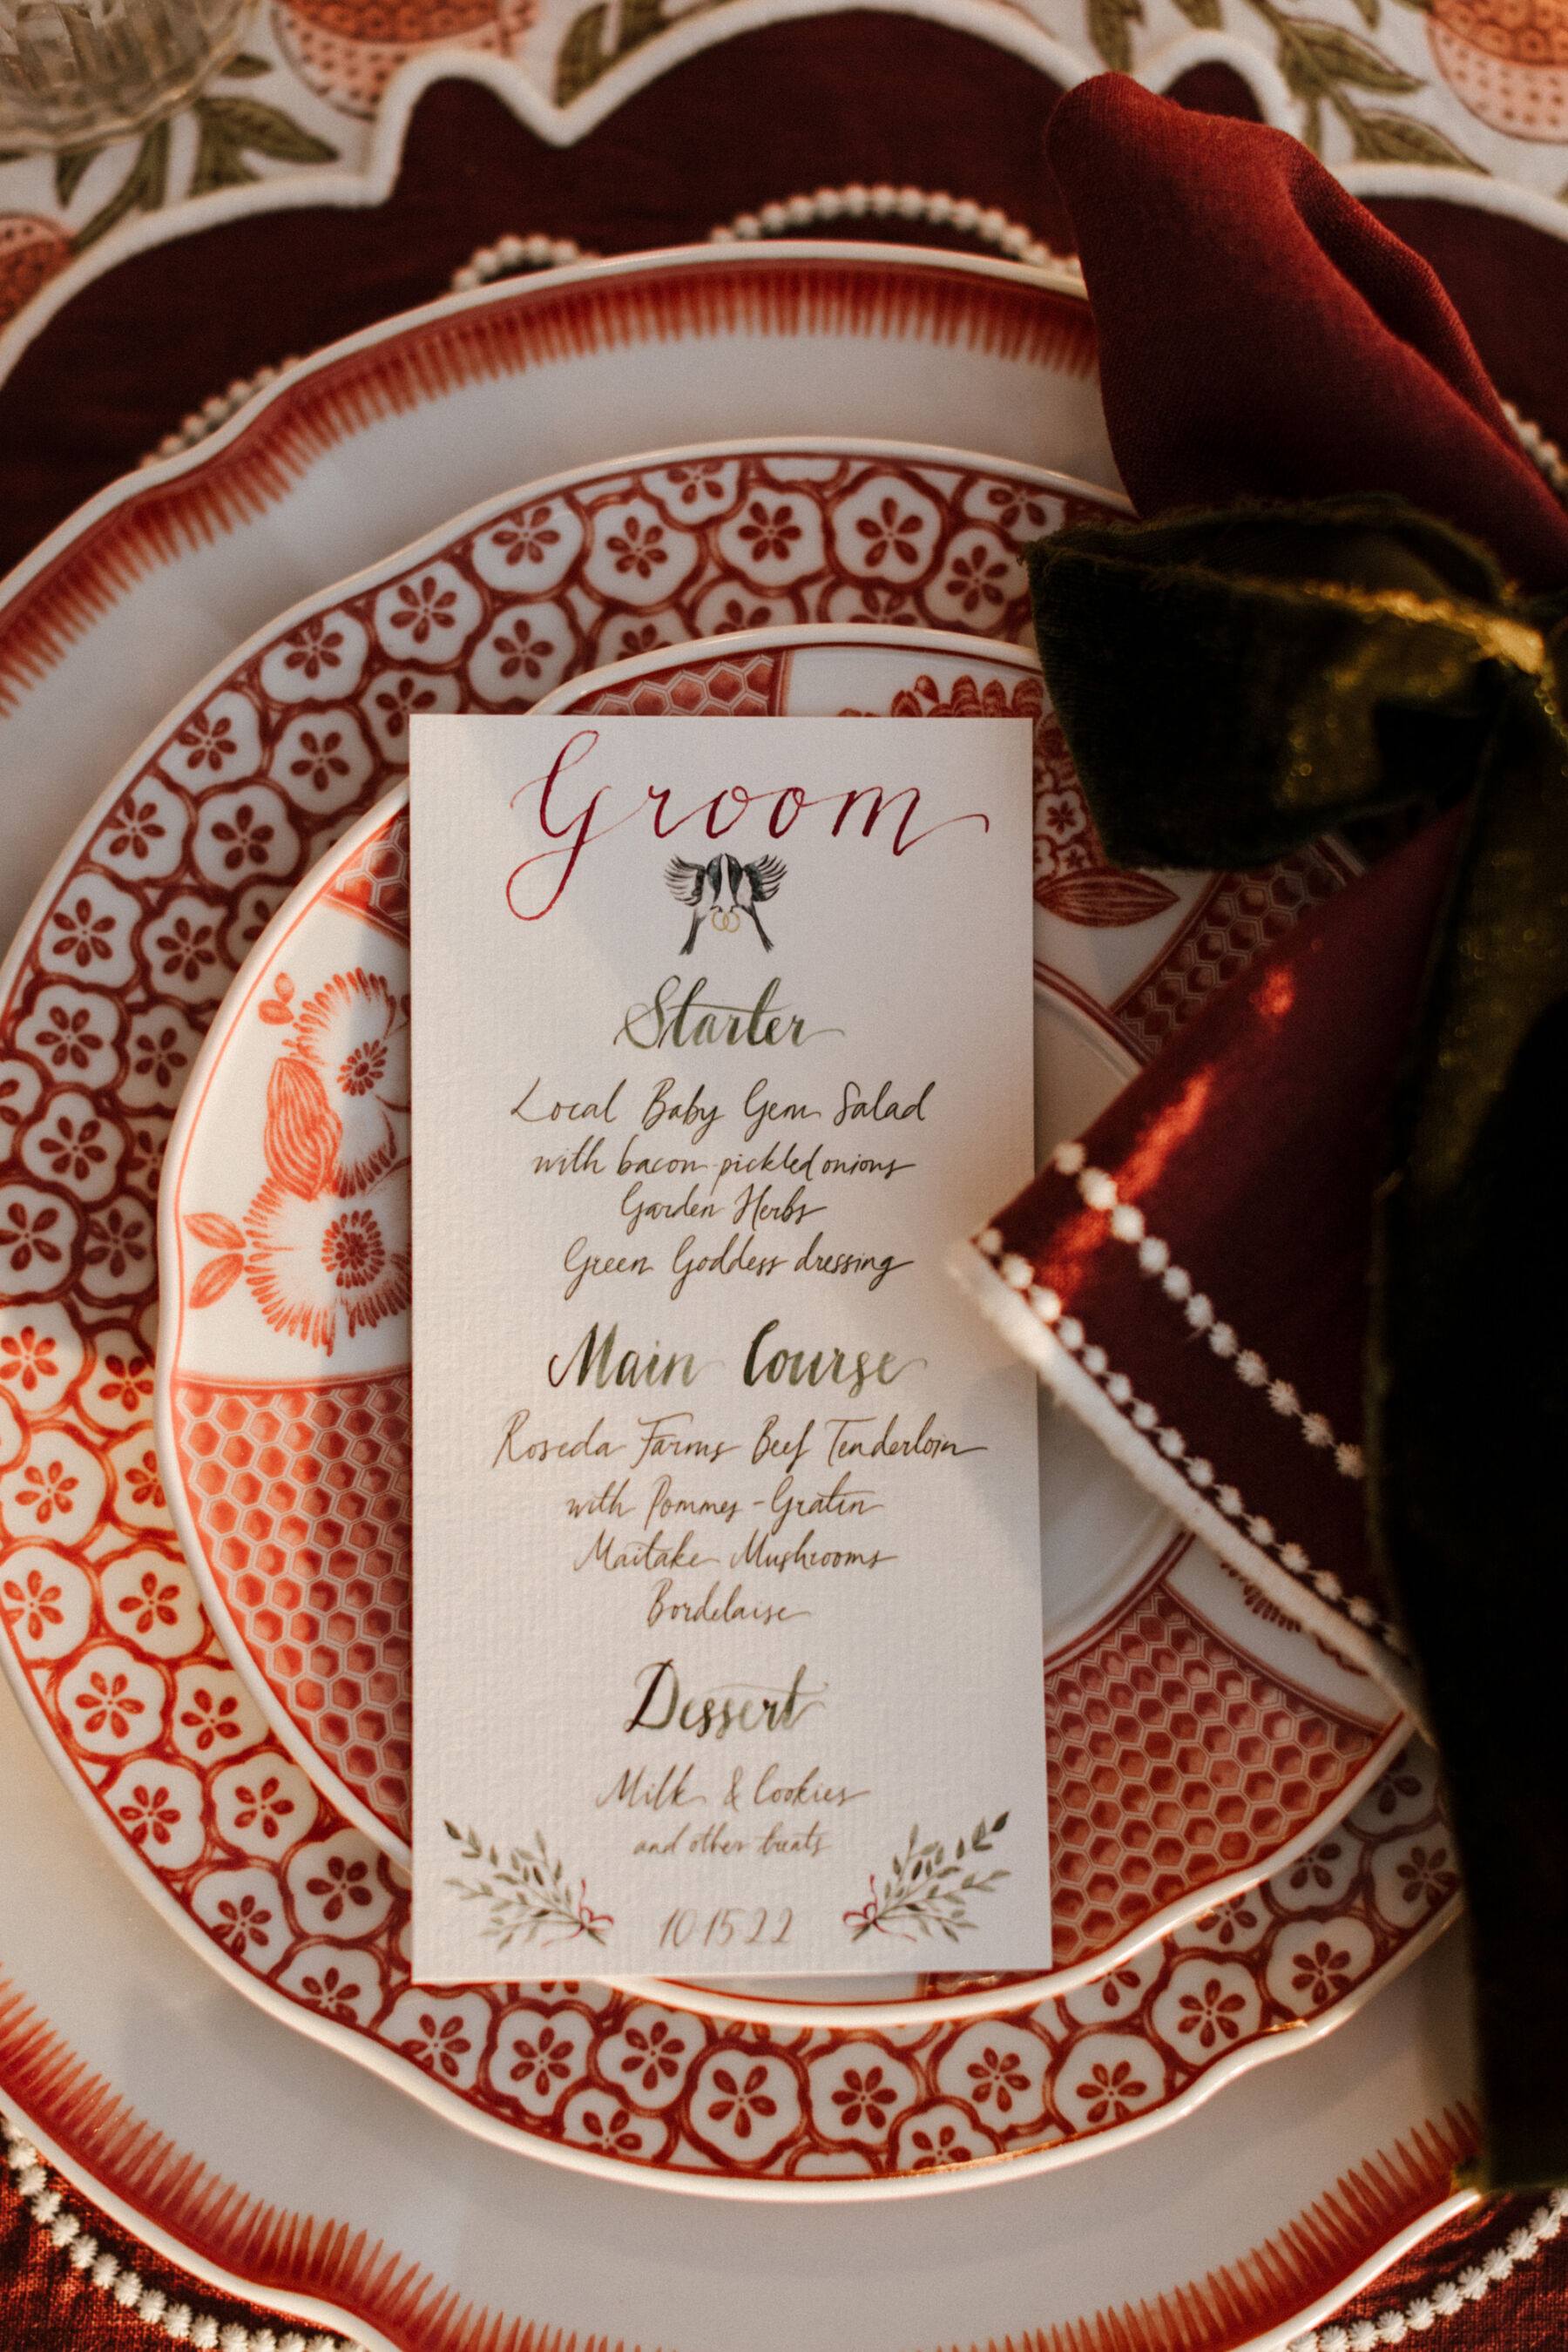 Hand calligraphy written wedding menu personalised for each guest featuring a wedding logo of two birds holding rings.